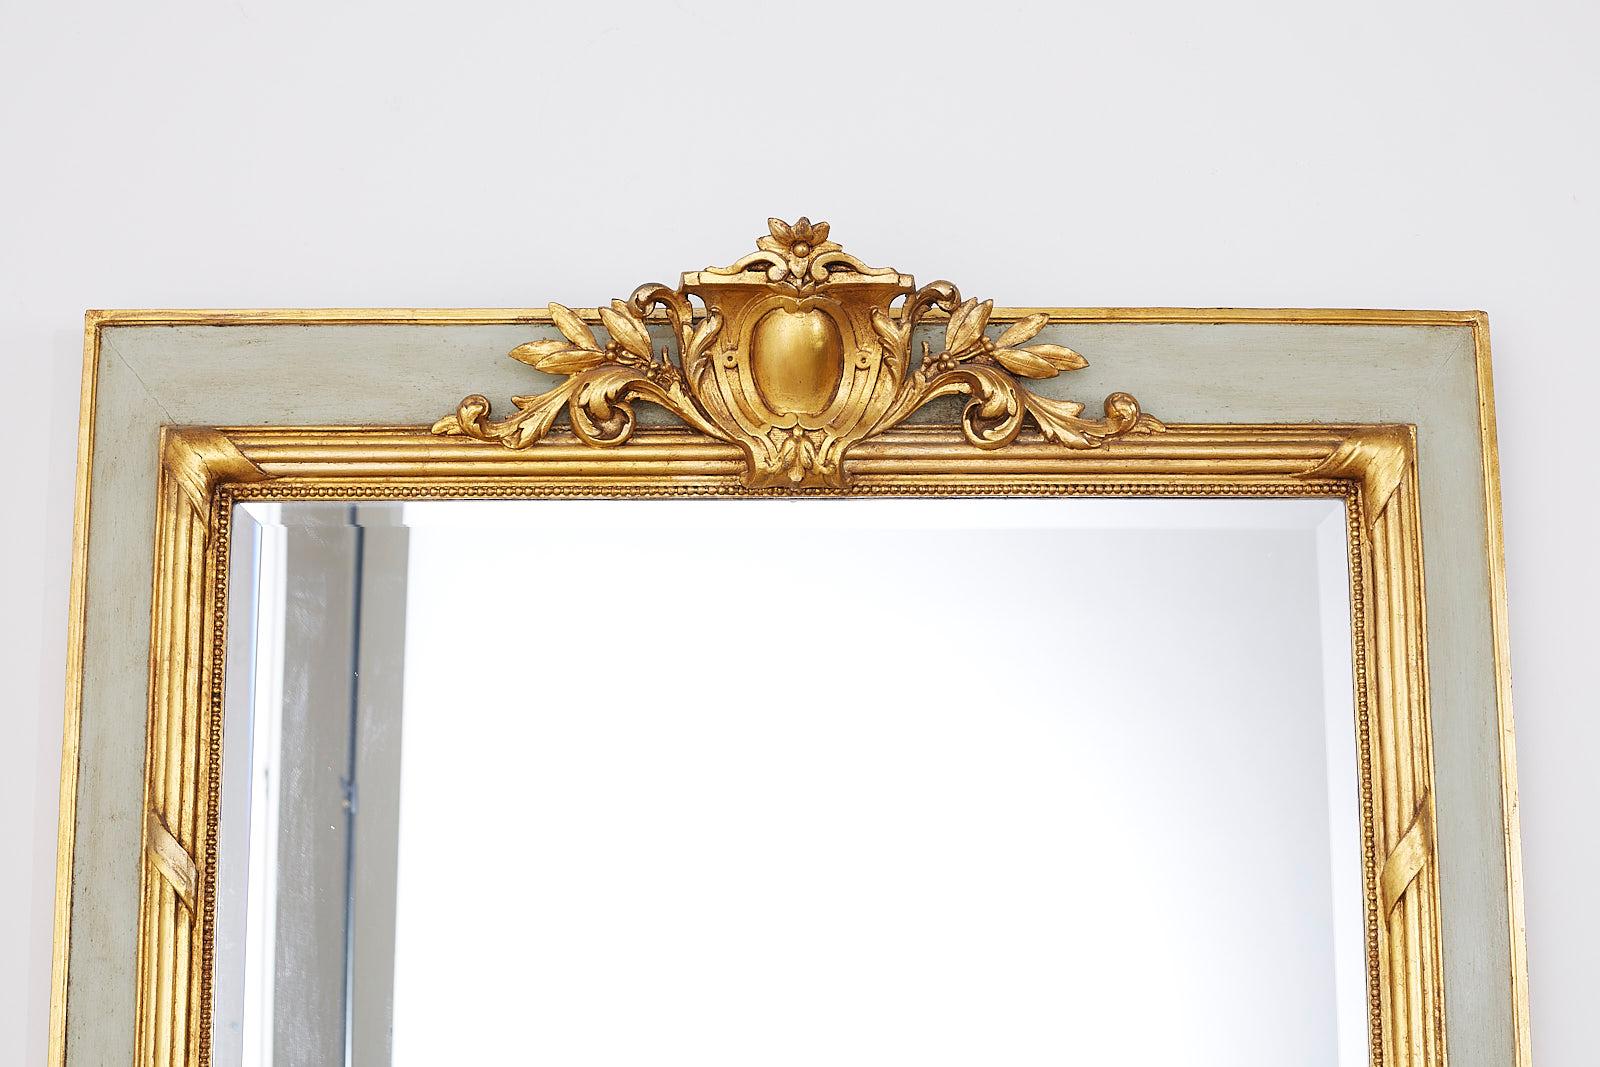 Beveled Louis XVI Neoclassical Style Giltwood Trumeau or Pier Glass